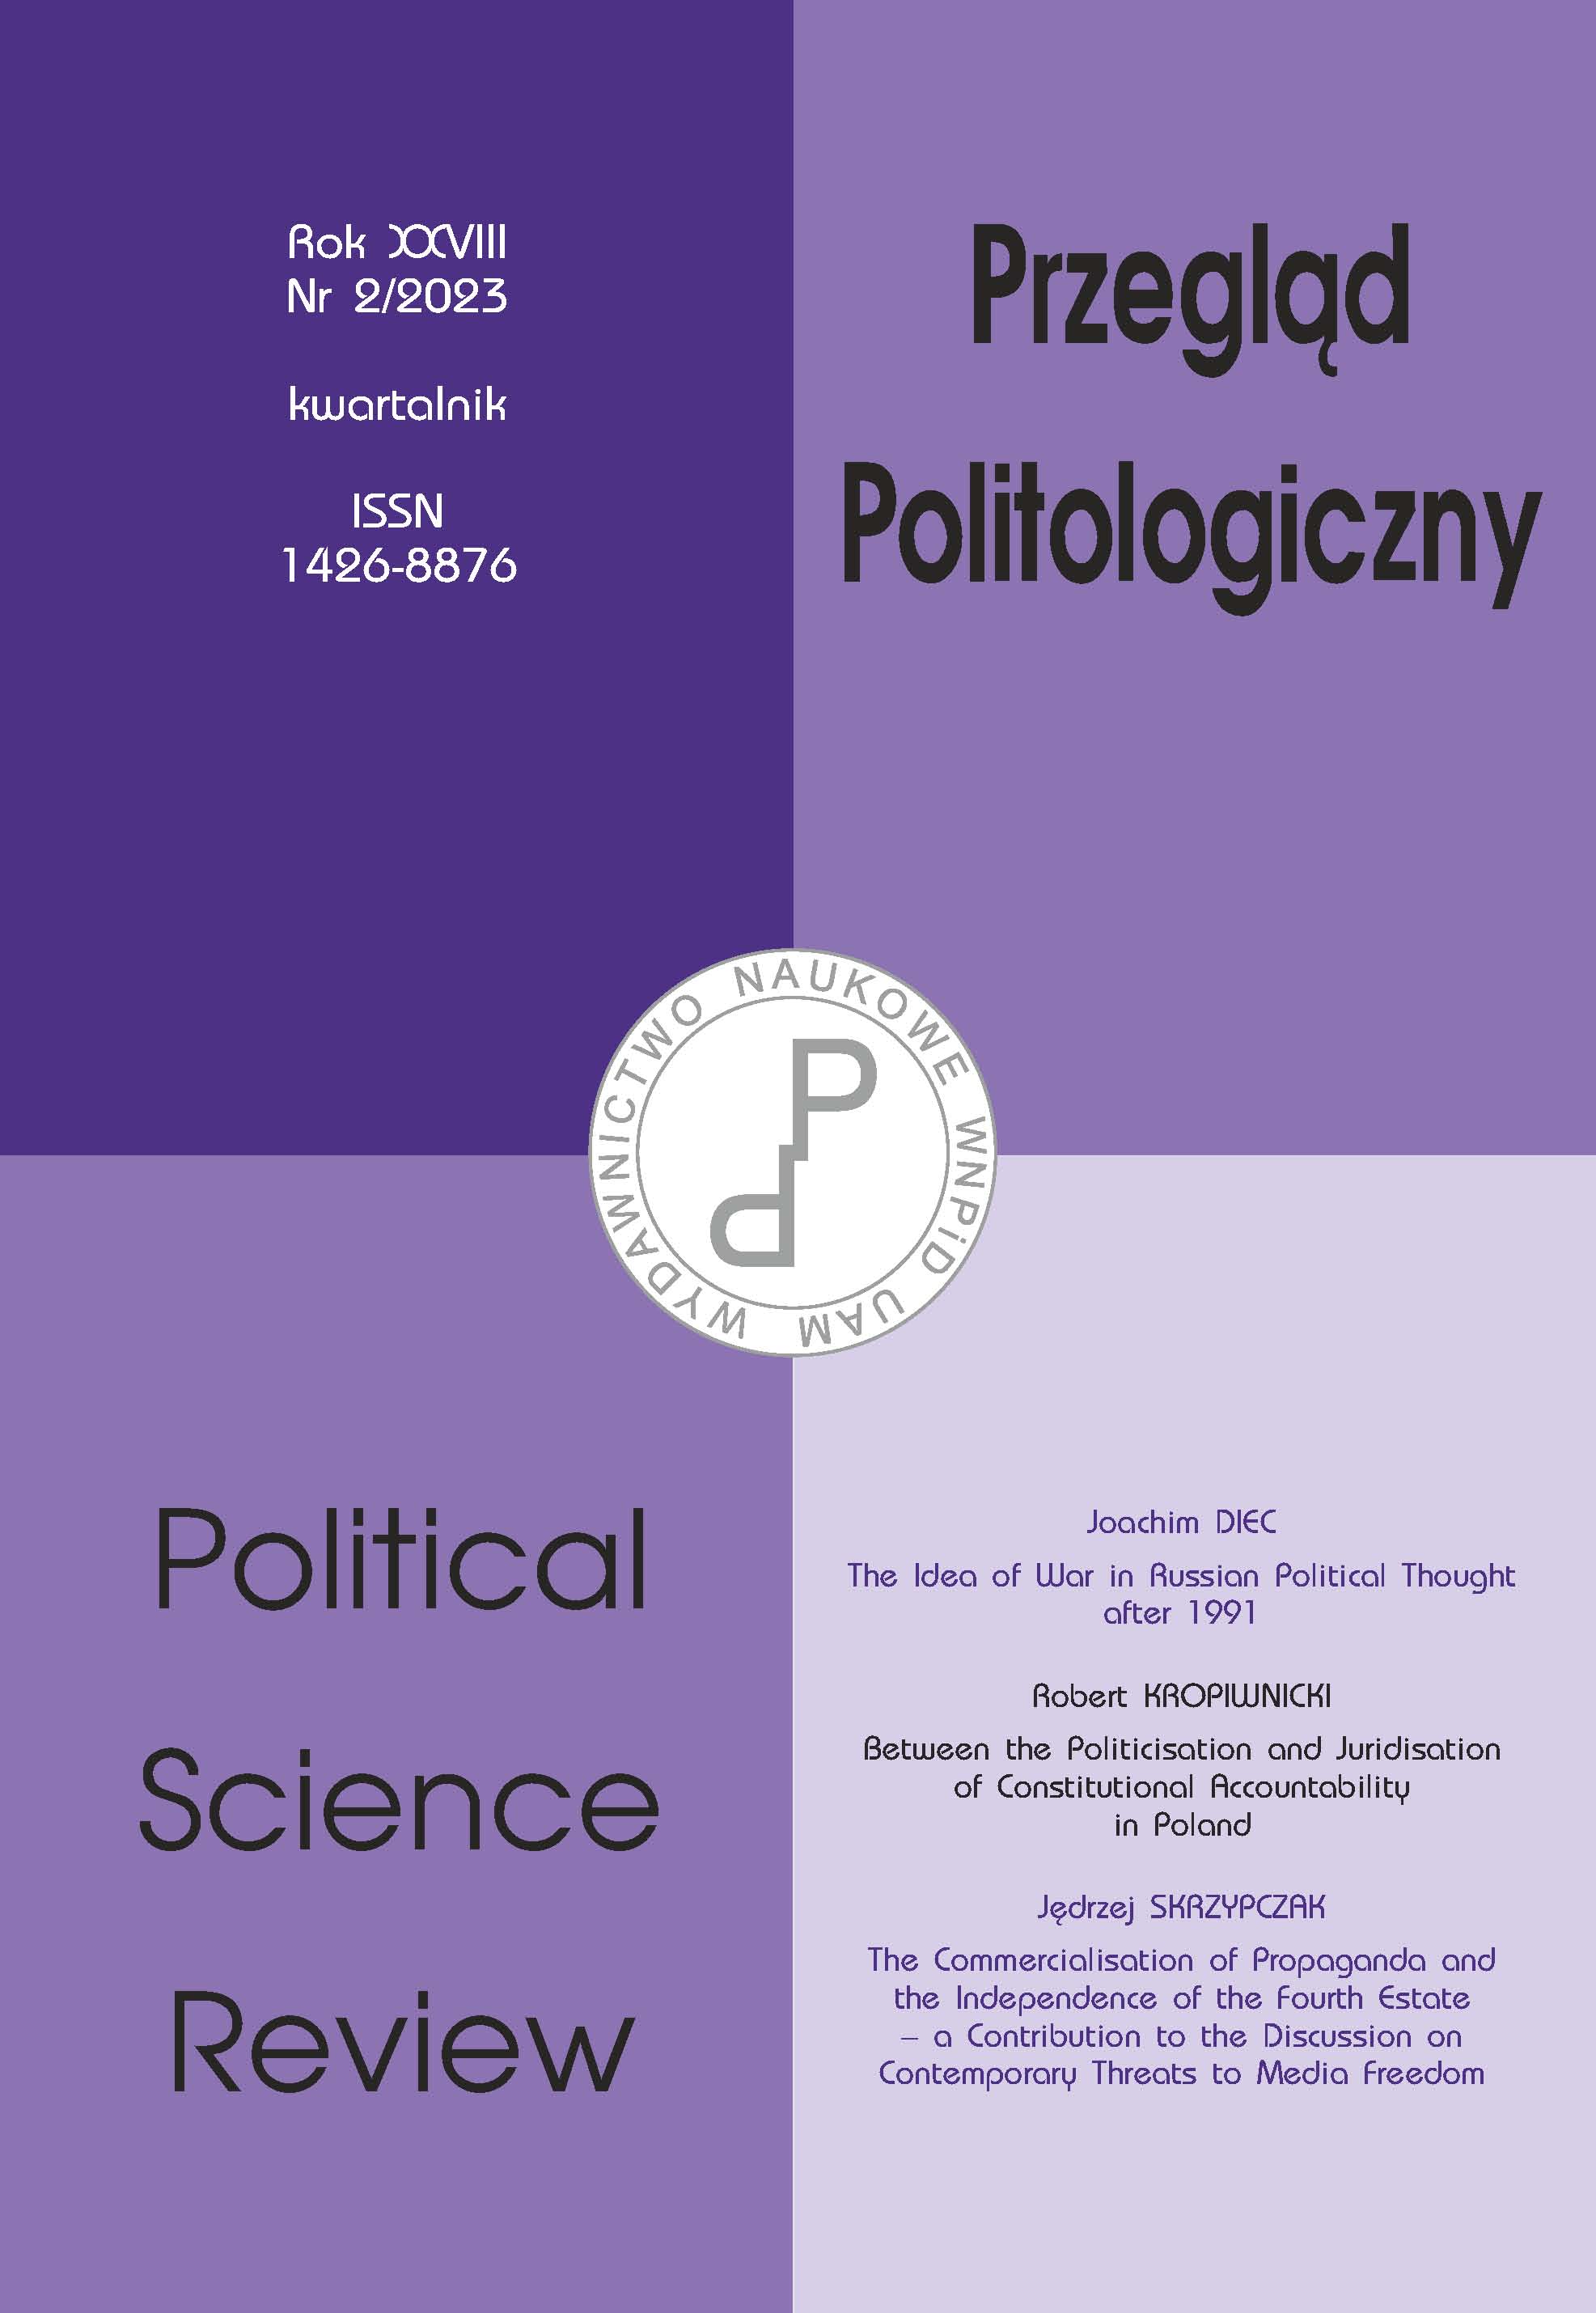 Political Communication on Social Media During Poland’s 2020 Presidential Campaign